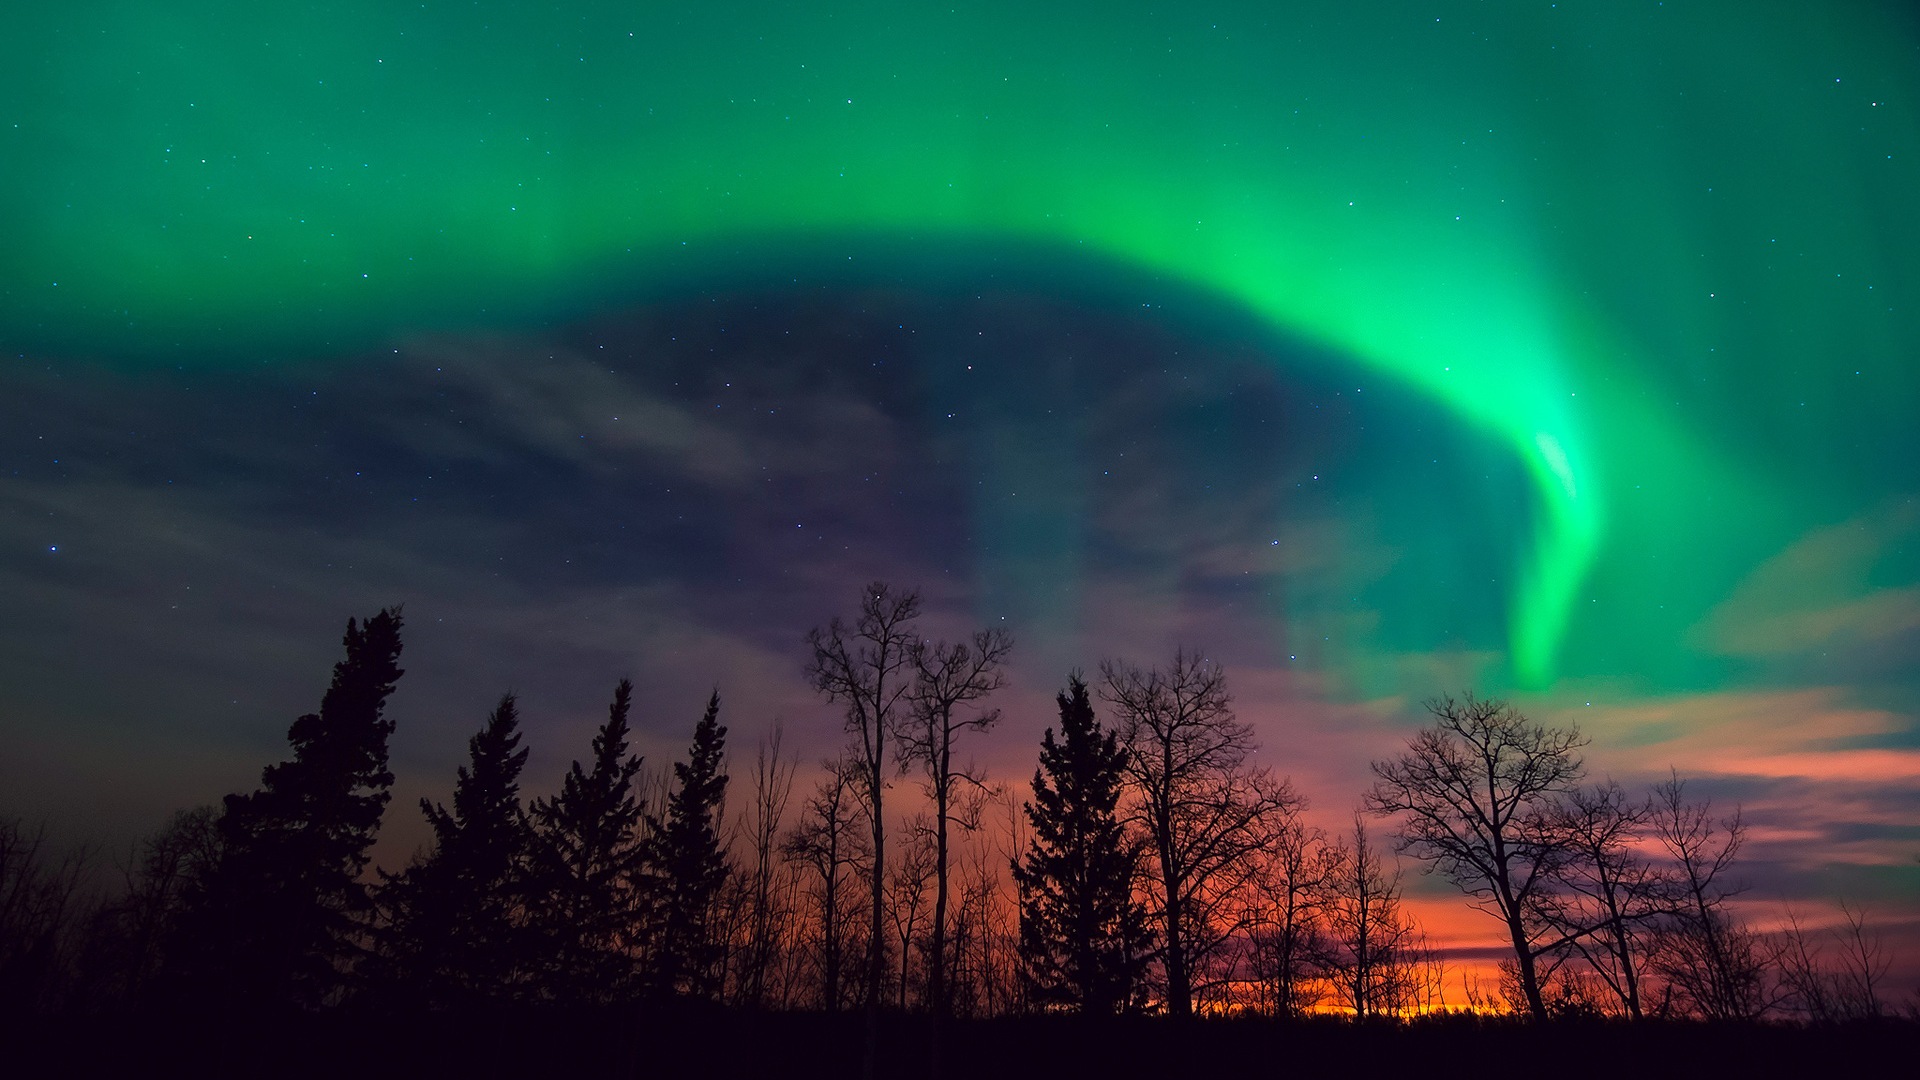 Natural wonders of the Northern Lights HD Wallpaper (1) #19 - 1920x1080